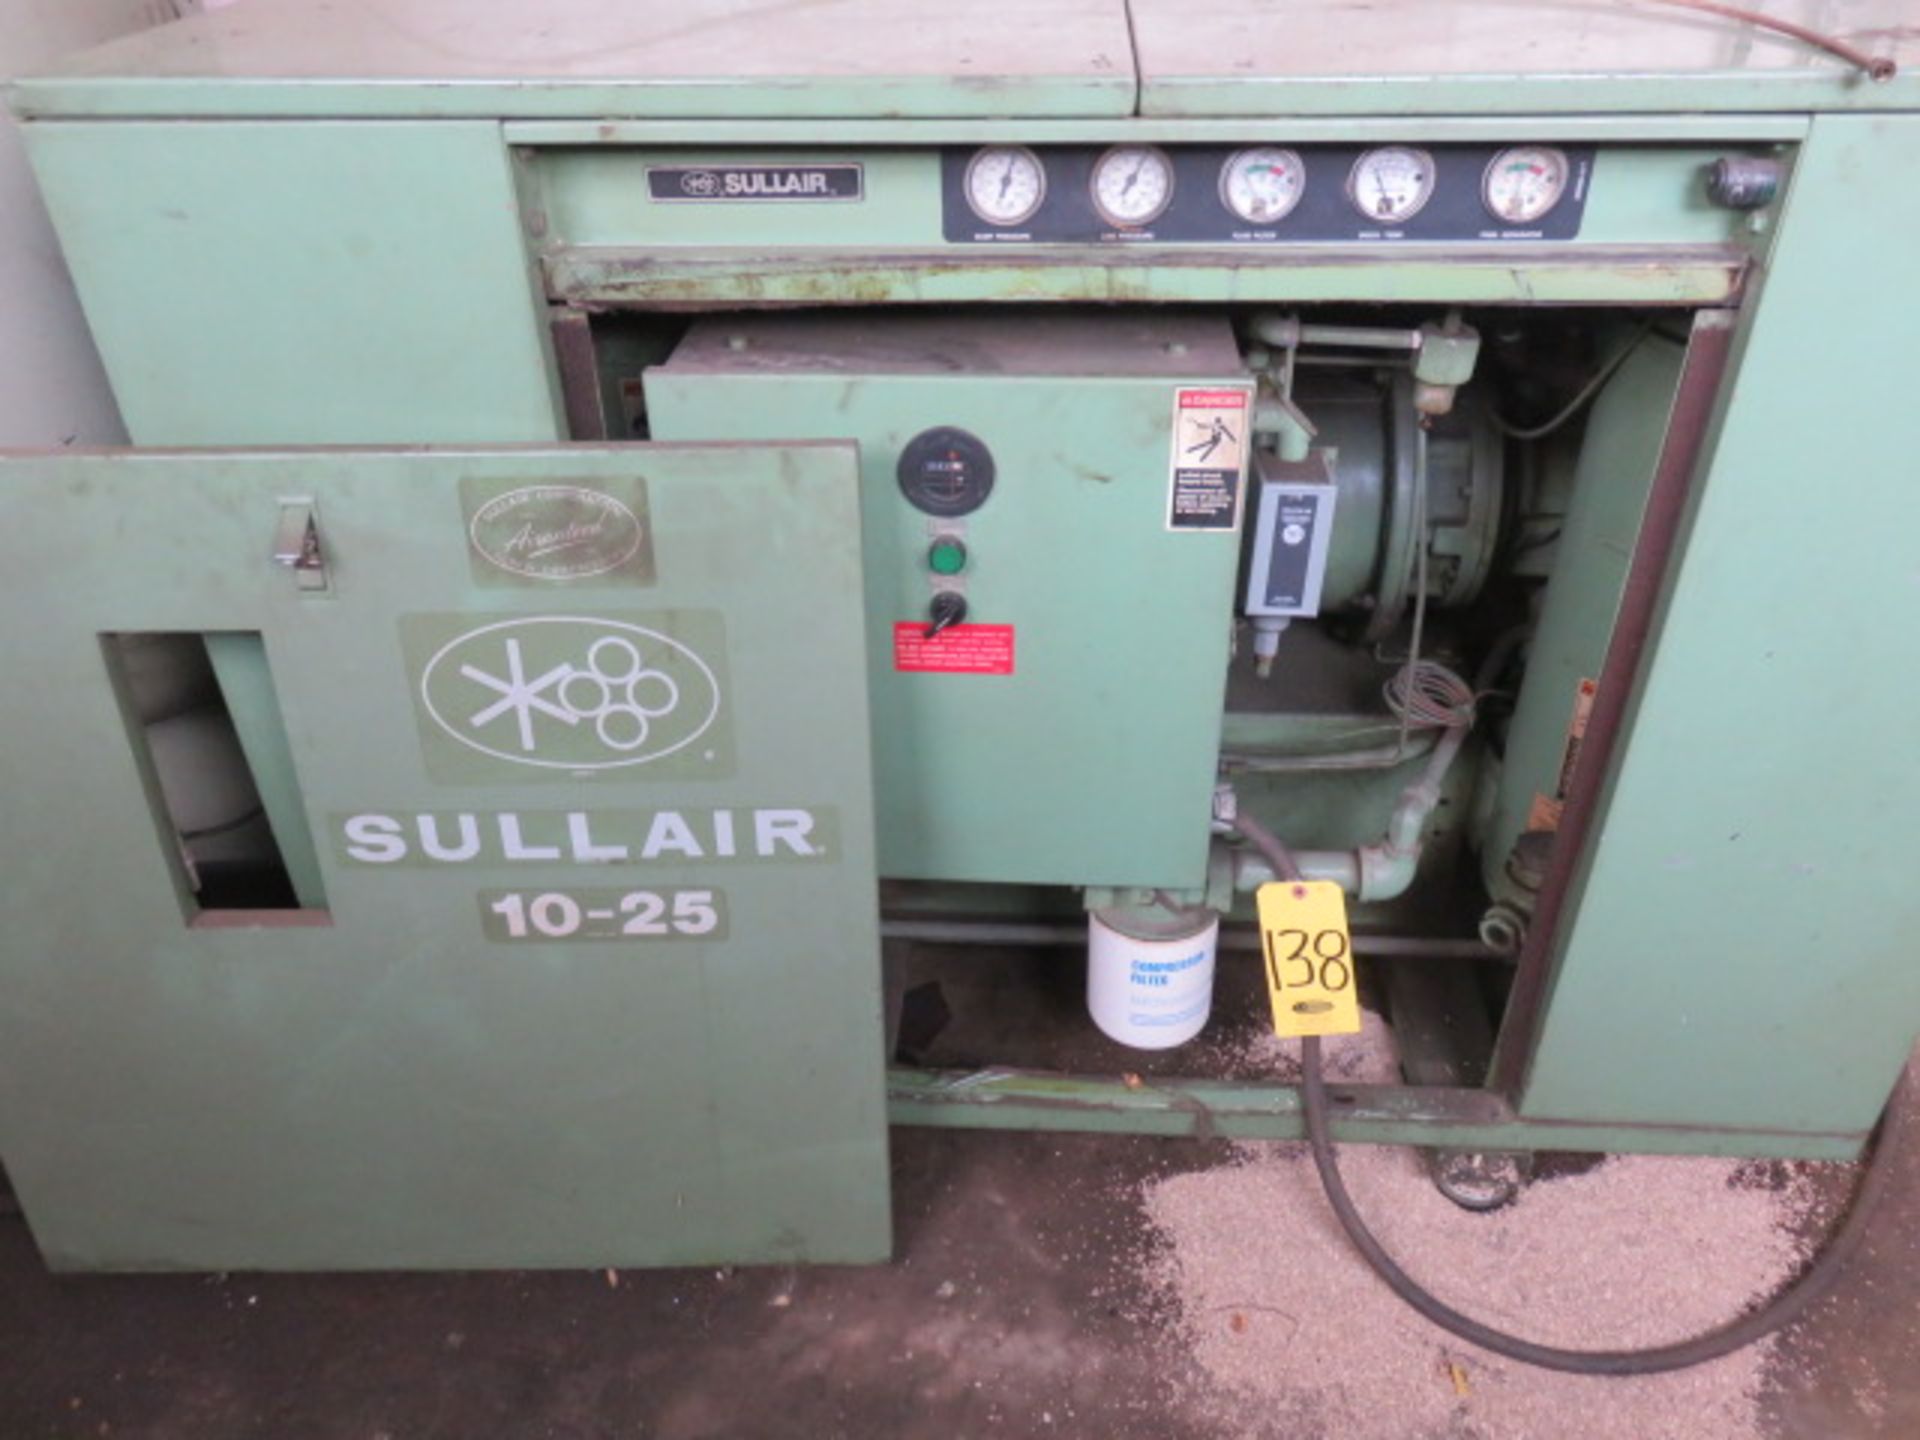 SULLAIR 10-25 ROTARY SCREW AIR COMPRESSOR, 25 HP, 43,407 HRS - Image 4 of 4